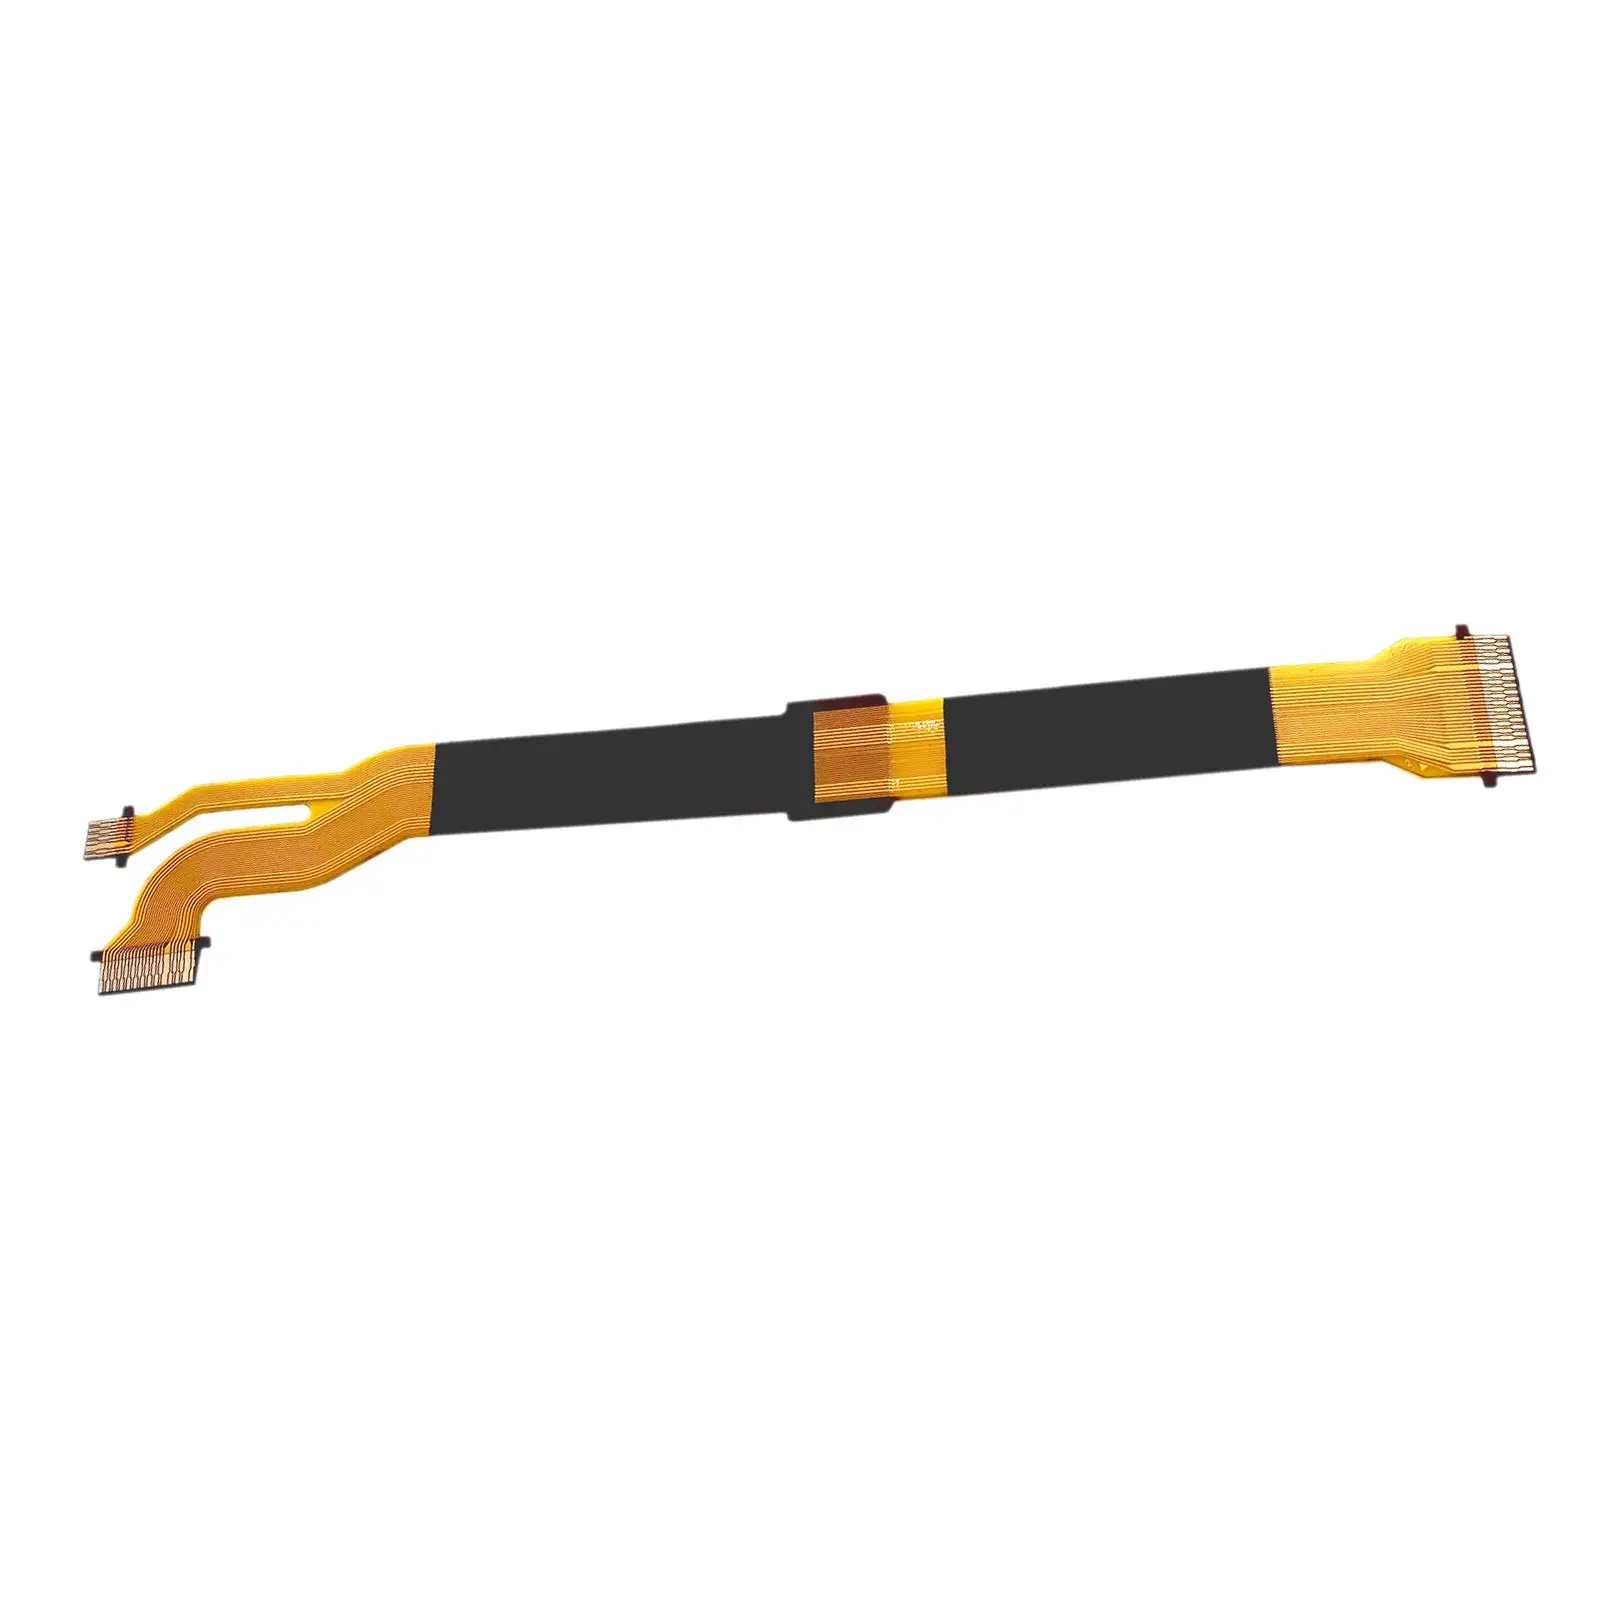 Lens Anti SHAKE Flex Cable Easily Install Repair Part Replaces Durable Stable Performance Brass Digital Camera for E 55-210 mm